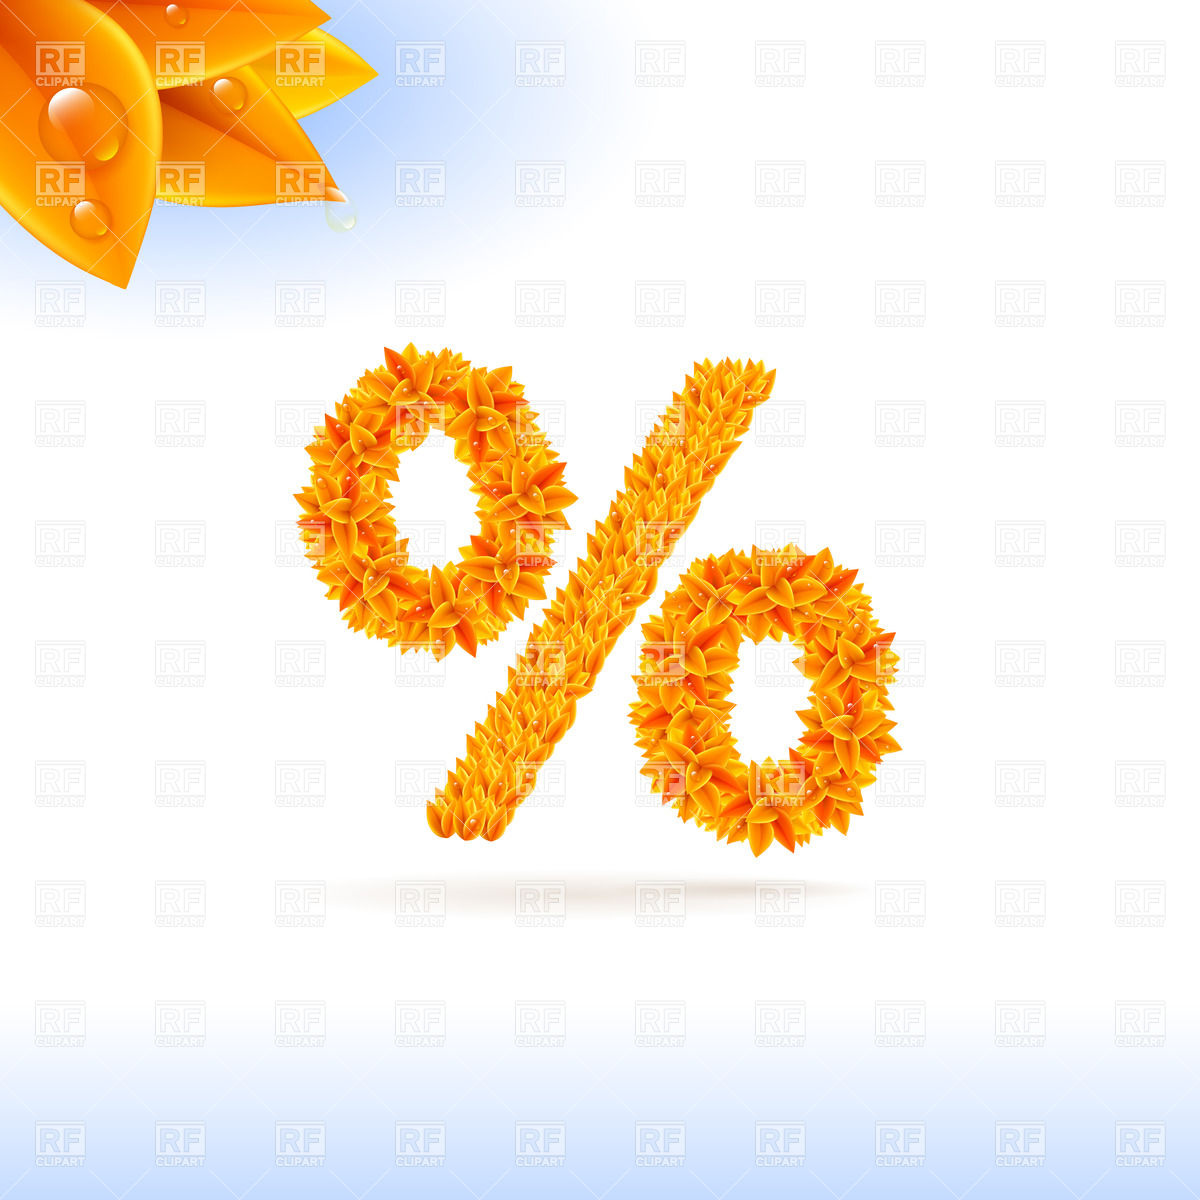 Natural Font Made Of Orange Leaves With Dew Drops   Percent Sign    